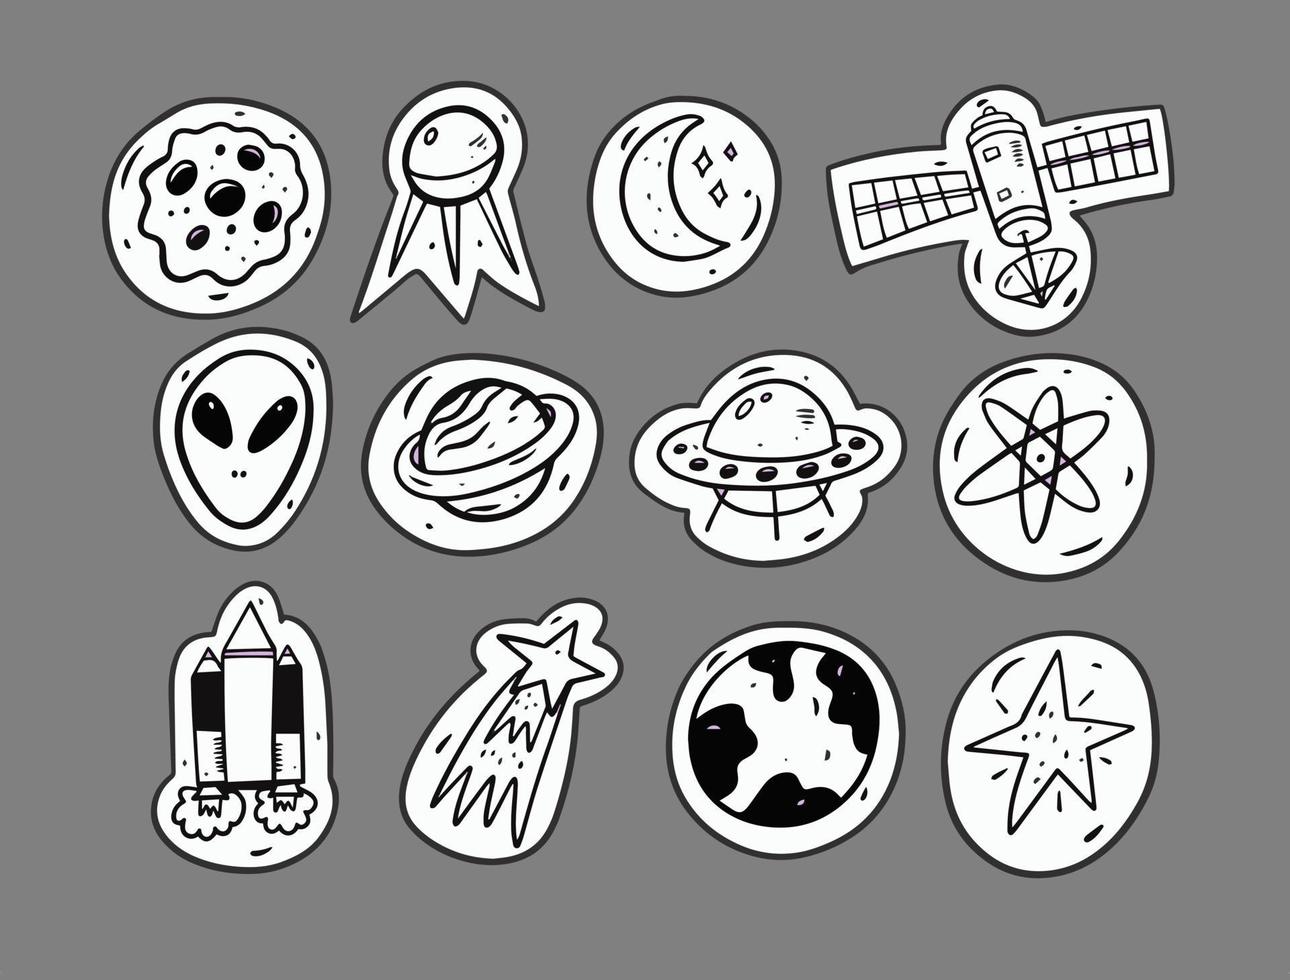 Space and Alien doodle set elements. Cosmic isolated stickers. Cartoon vector illustration.